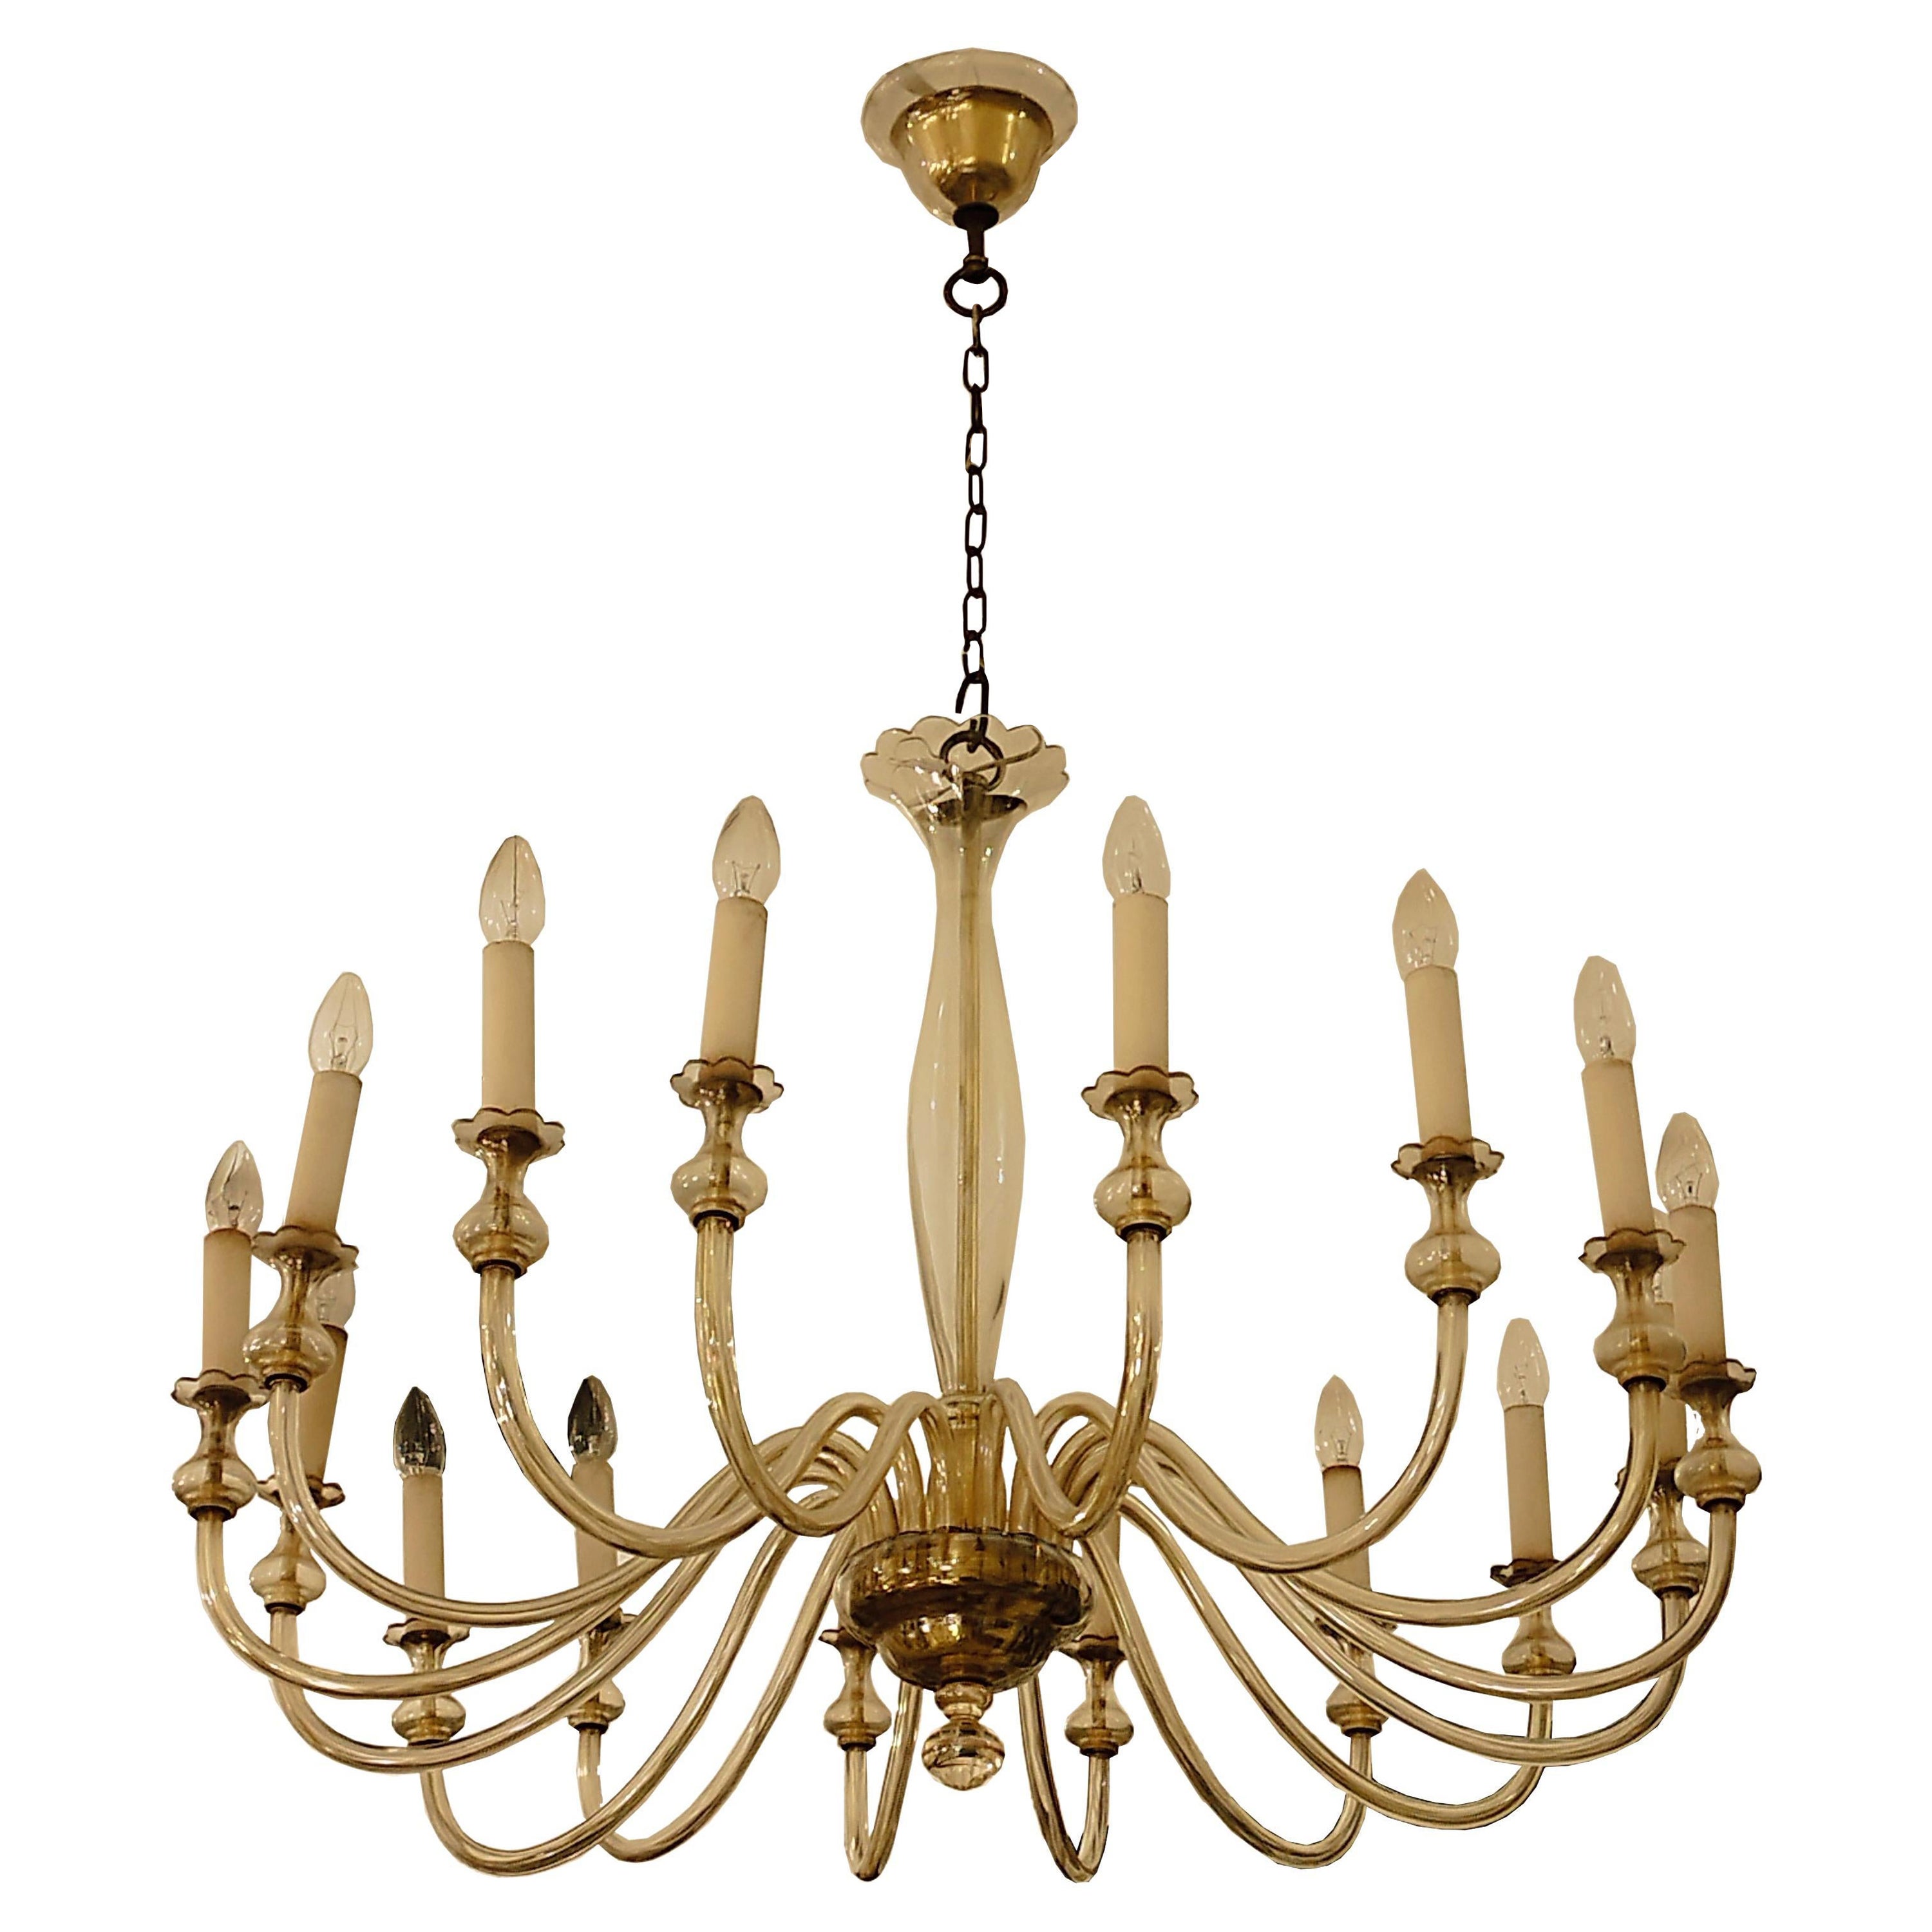 Venini 16-Light Murano Glass and Brass Chandelier, Italy 1950s For Sale